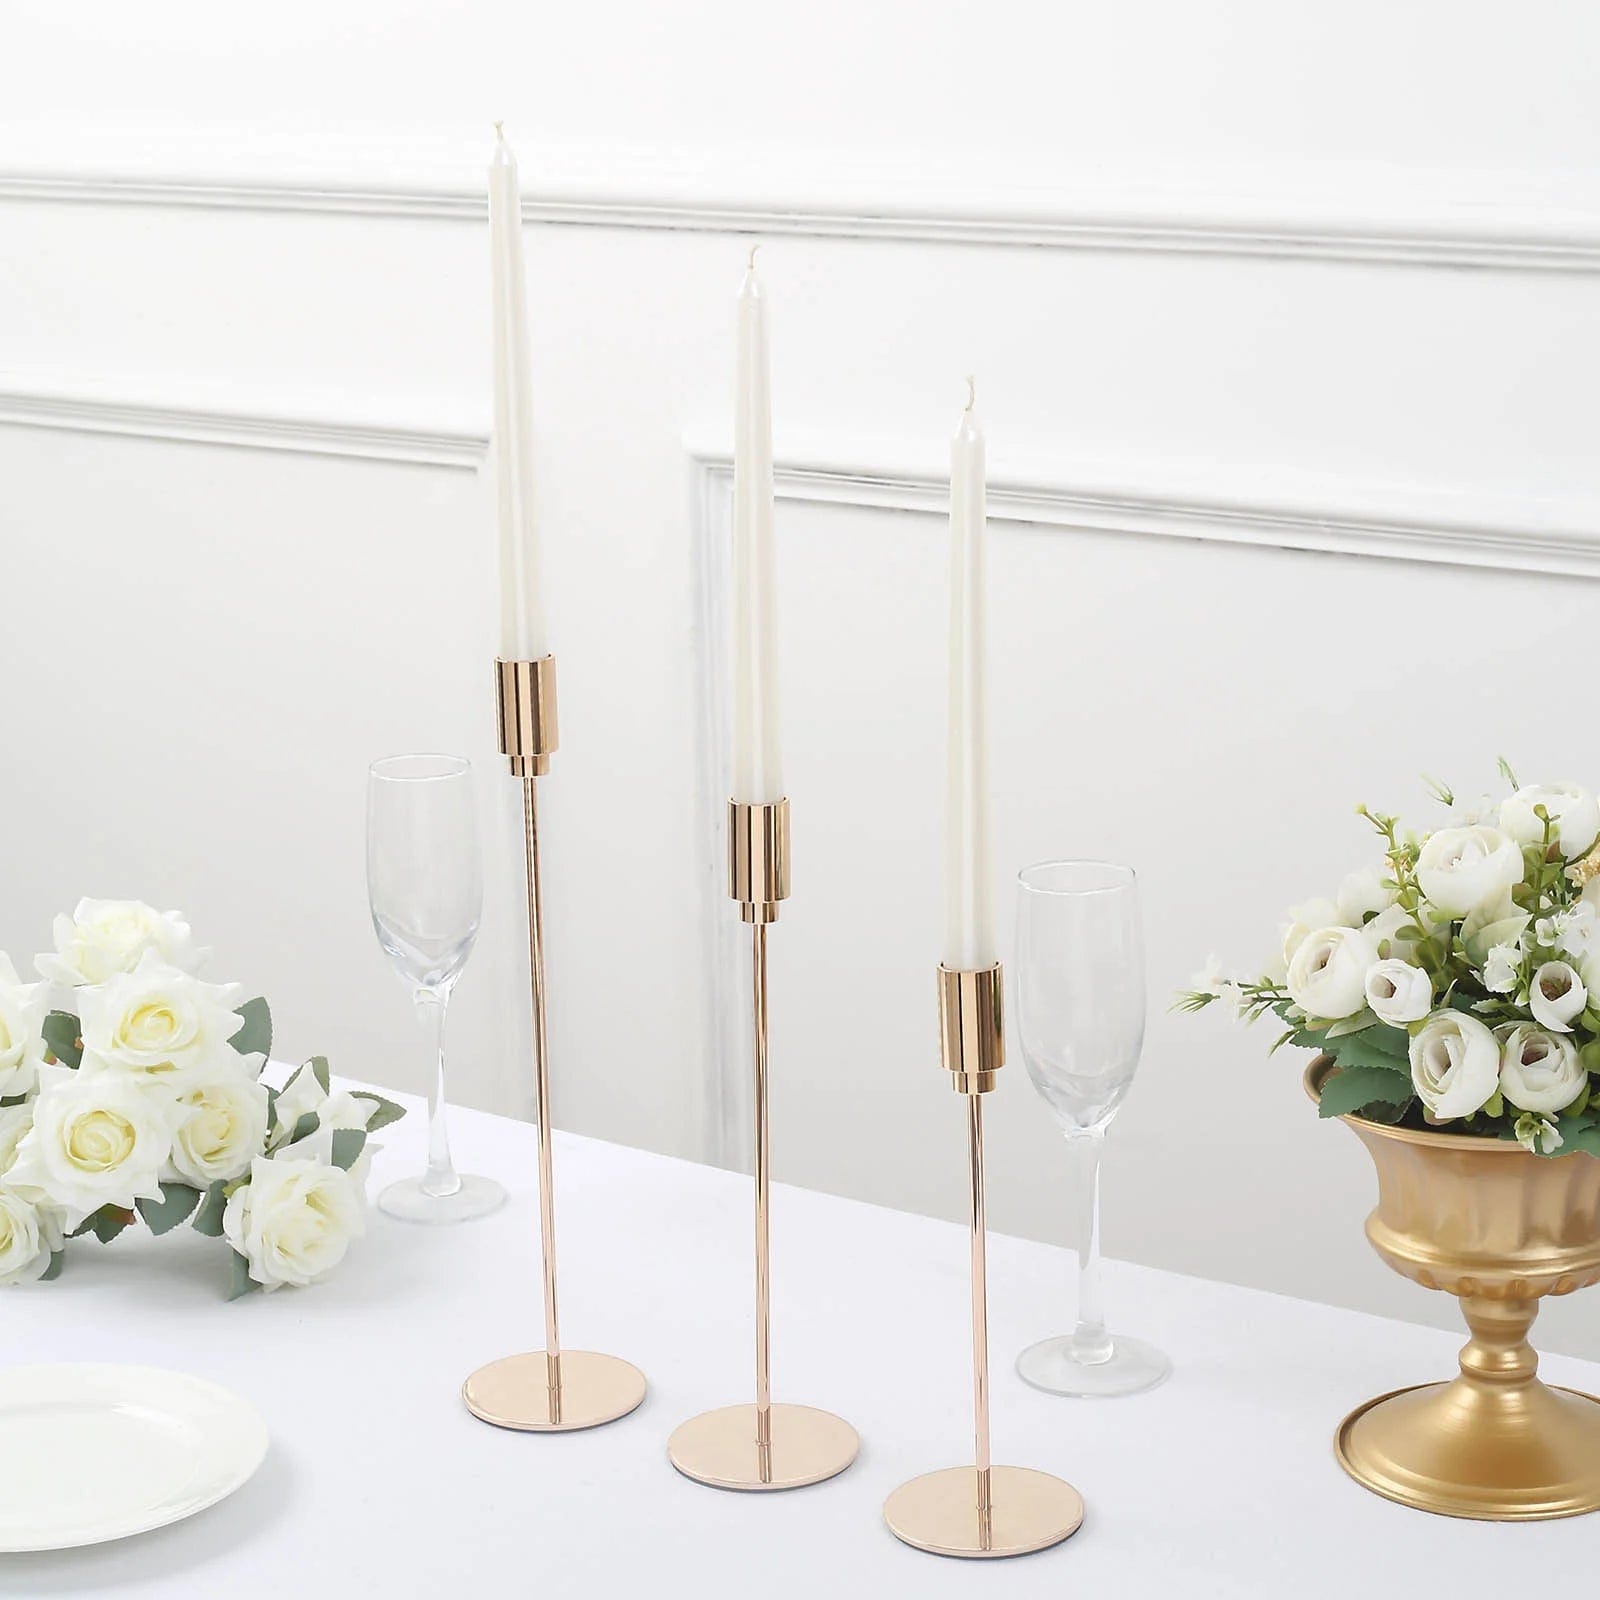 3 Gold Metal Candlesticks Stands Taper Candle Holders with Round Base